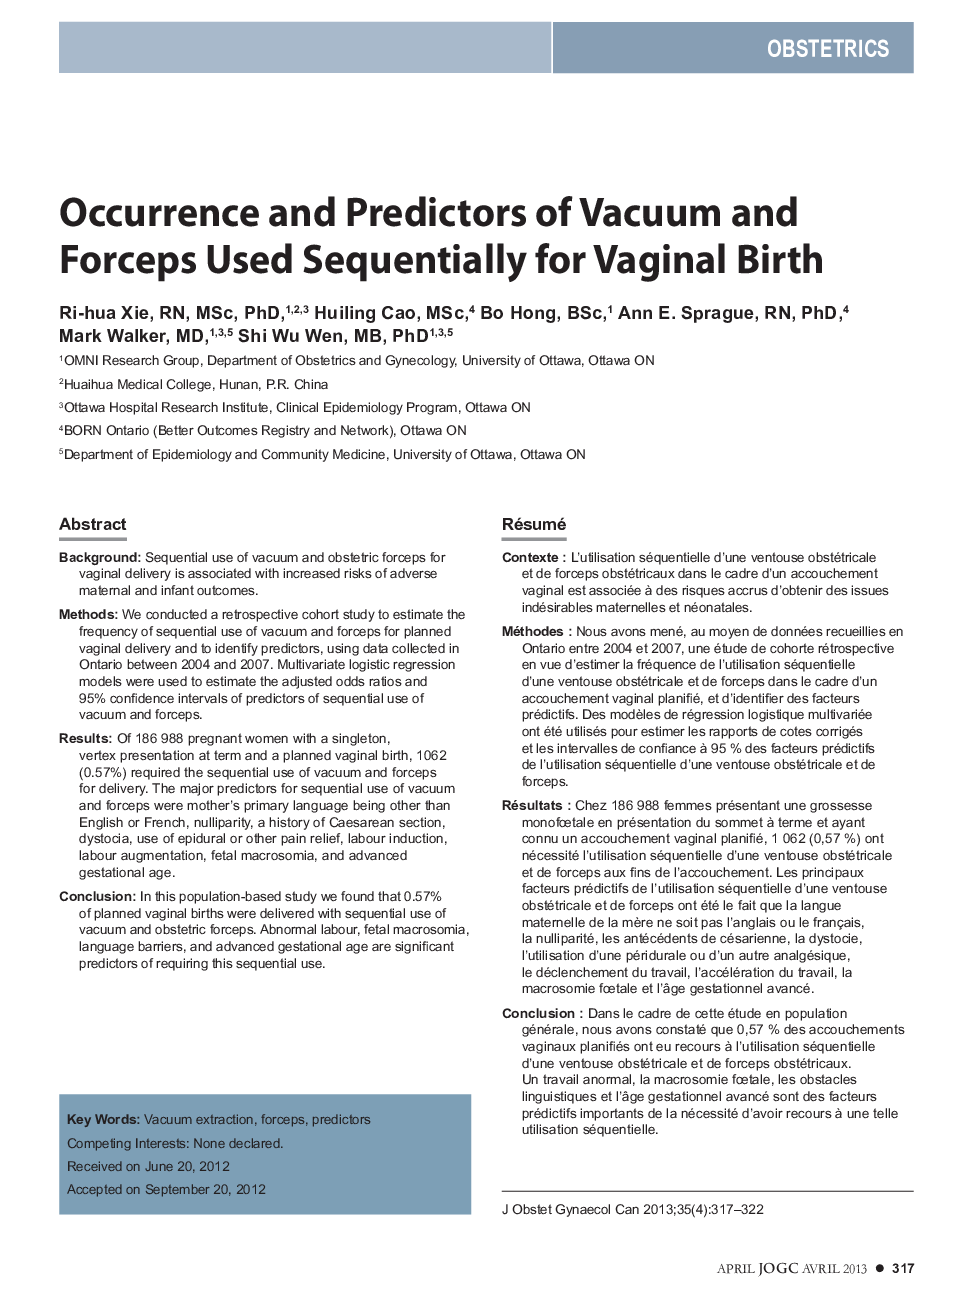 Occurrence and Predictors of Vacuum and Forceps Used Sequentially for Vaginal Birth